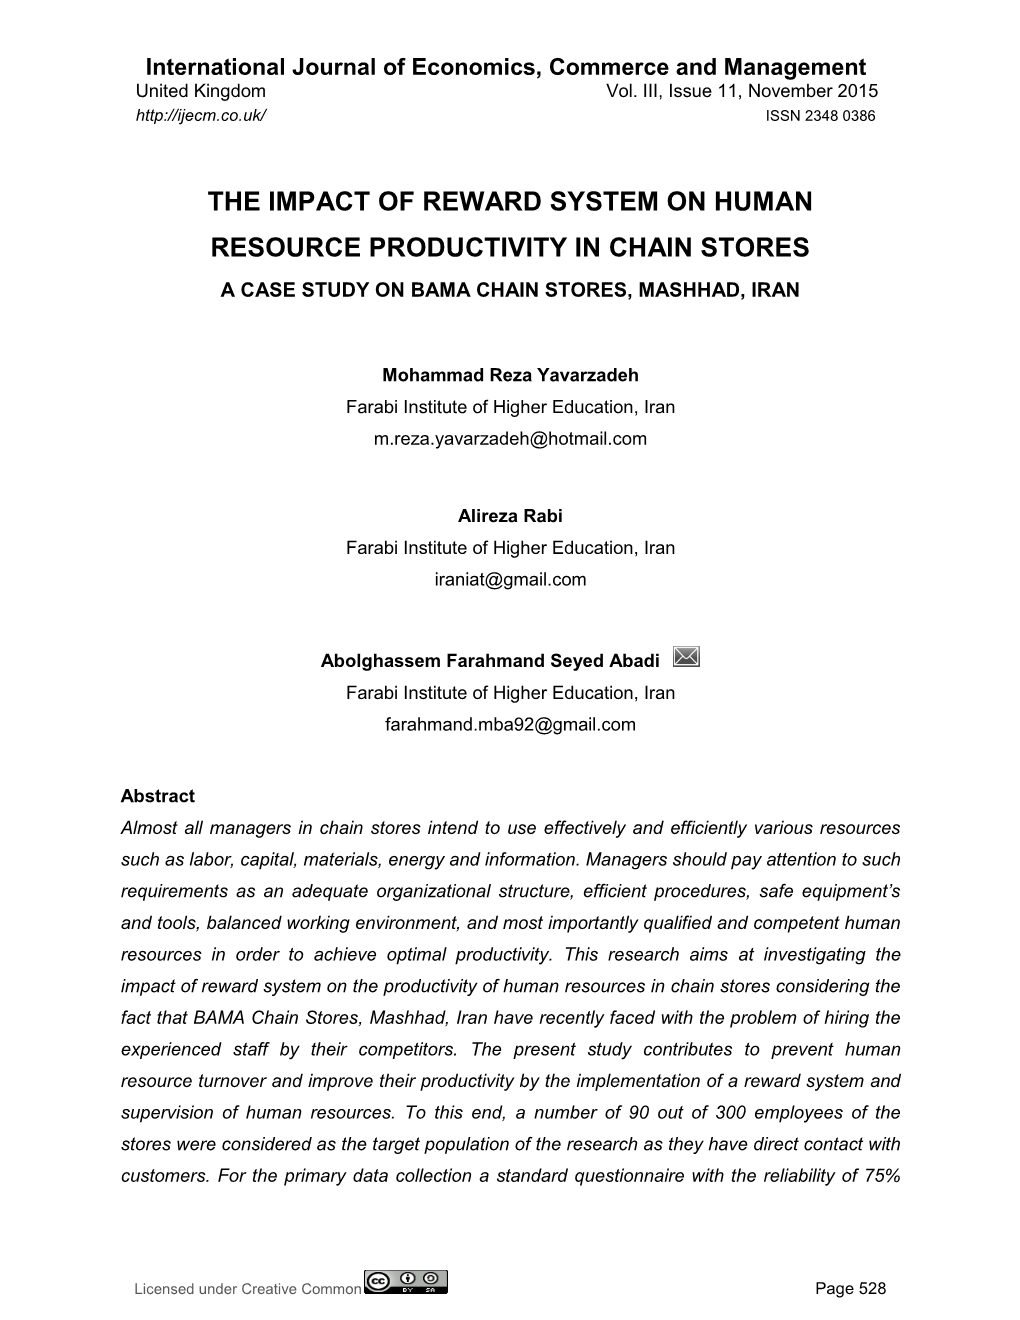 The Impact of Reward System on Human Resource Productivity in Chain Stores a Case Study on Bama Chain Stores, Mashhad, Iran